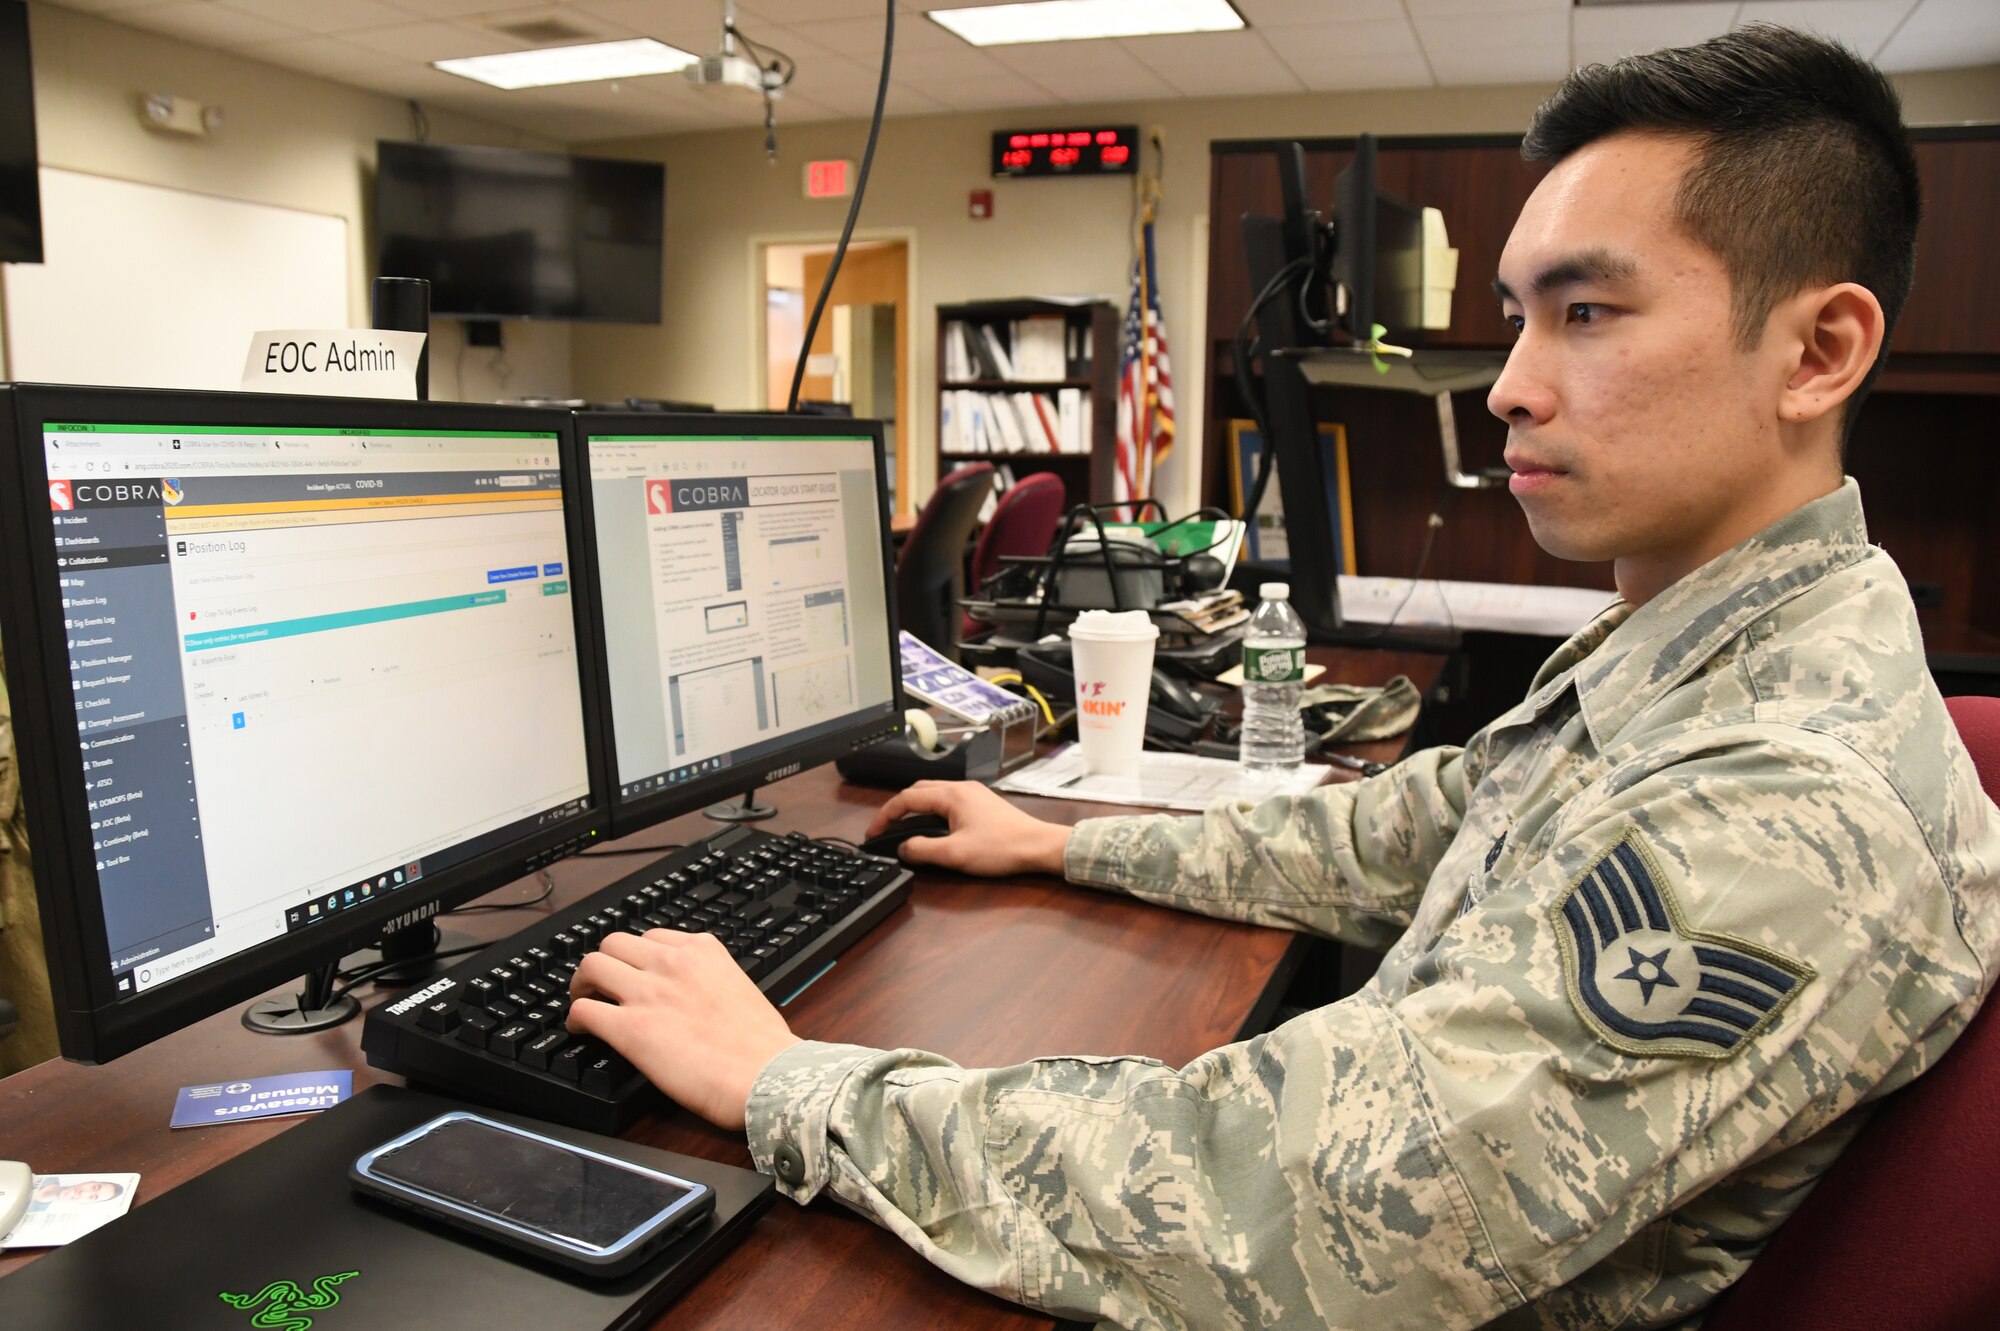 Staff Sgt. Tran Thinh, 104th Fighter Wing Emergency Management, monitors and coordinates with the Emergency Operation Center on critical information requests in response to COVID-19, March 30, 2020. Trinh serves in his community as an Air National Guard member and is an engineering student at the University of Connecticut. (U.S. Air National Guard Photo by Senior Master Sgt. Julie Avey)